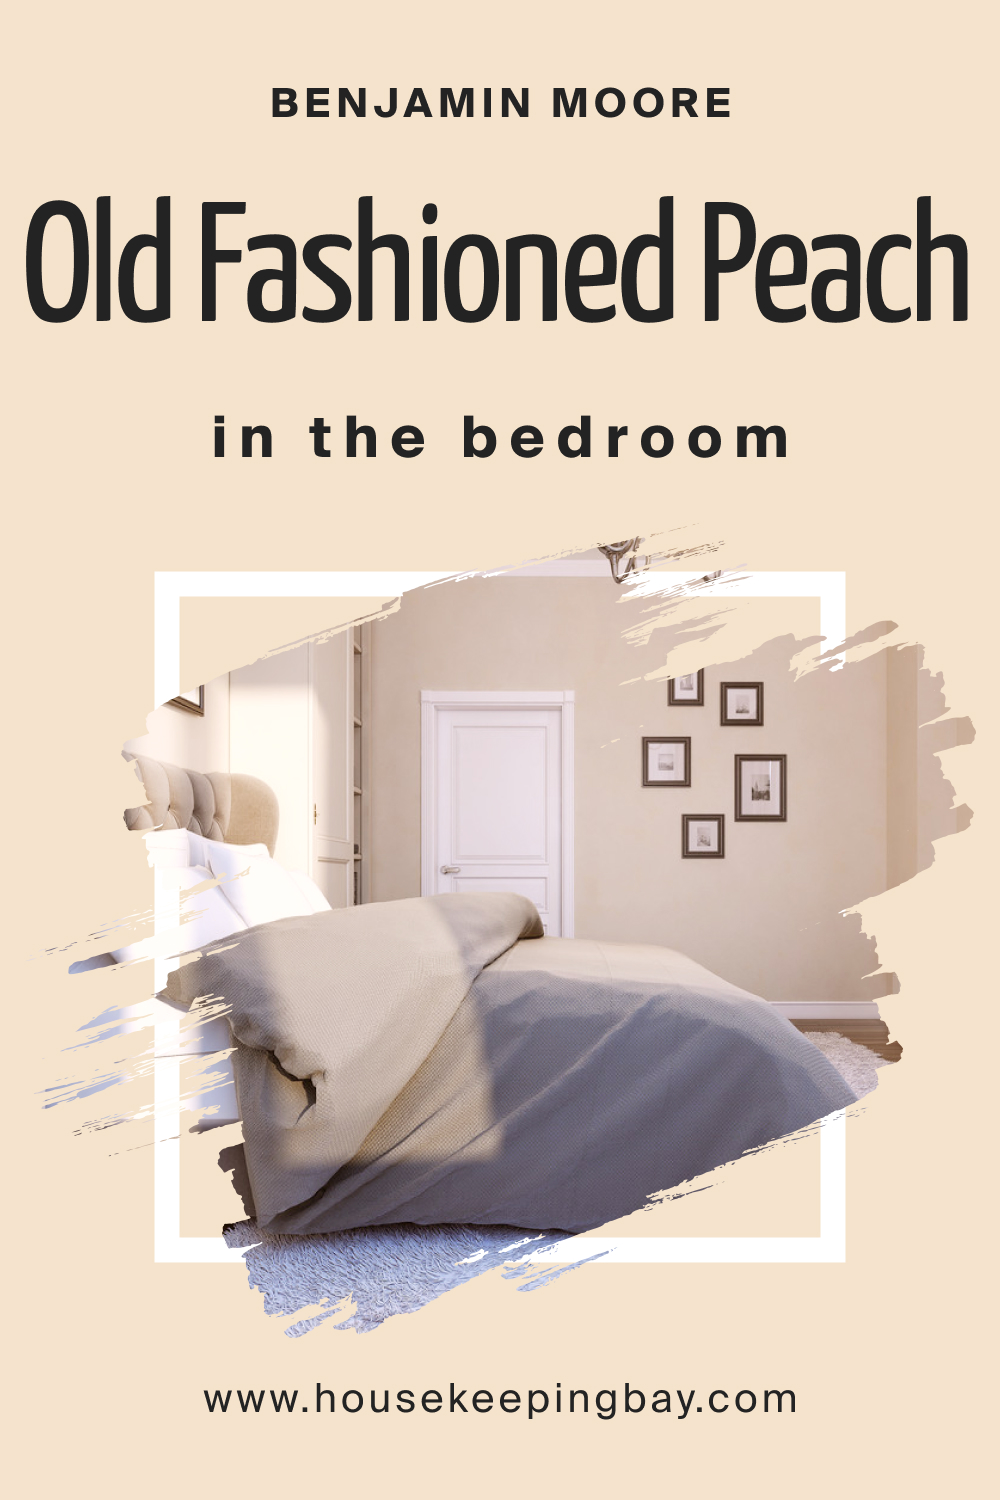 Benjamin Moore. Old Fashioned Peach OC 79 for the Bedroom